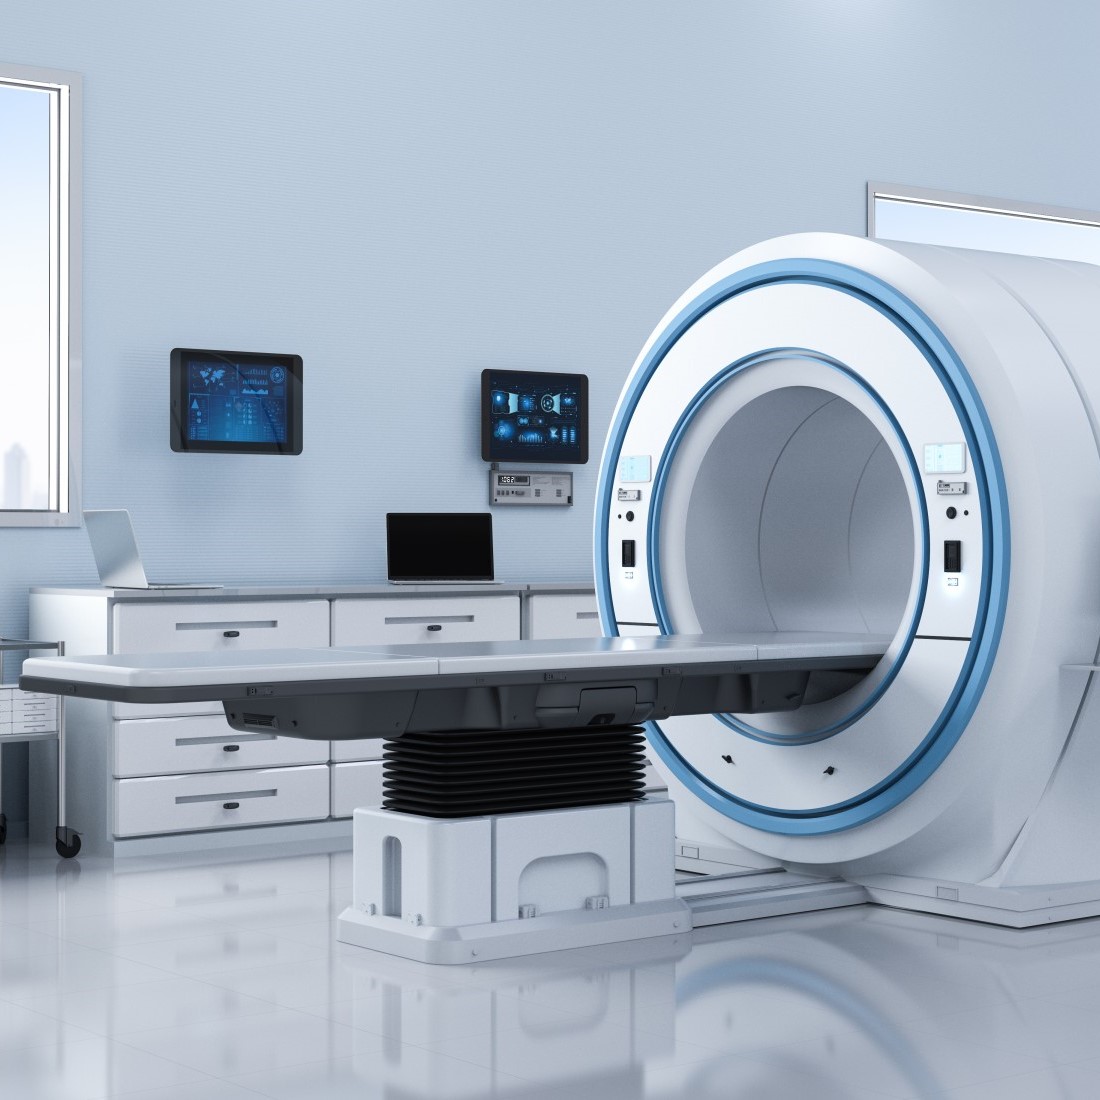 medical imaging machine (photo shows empty patient table at tunnel entrance of large device)